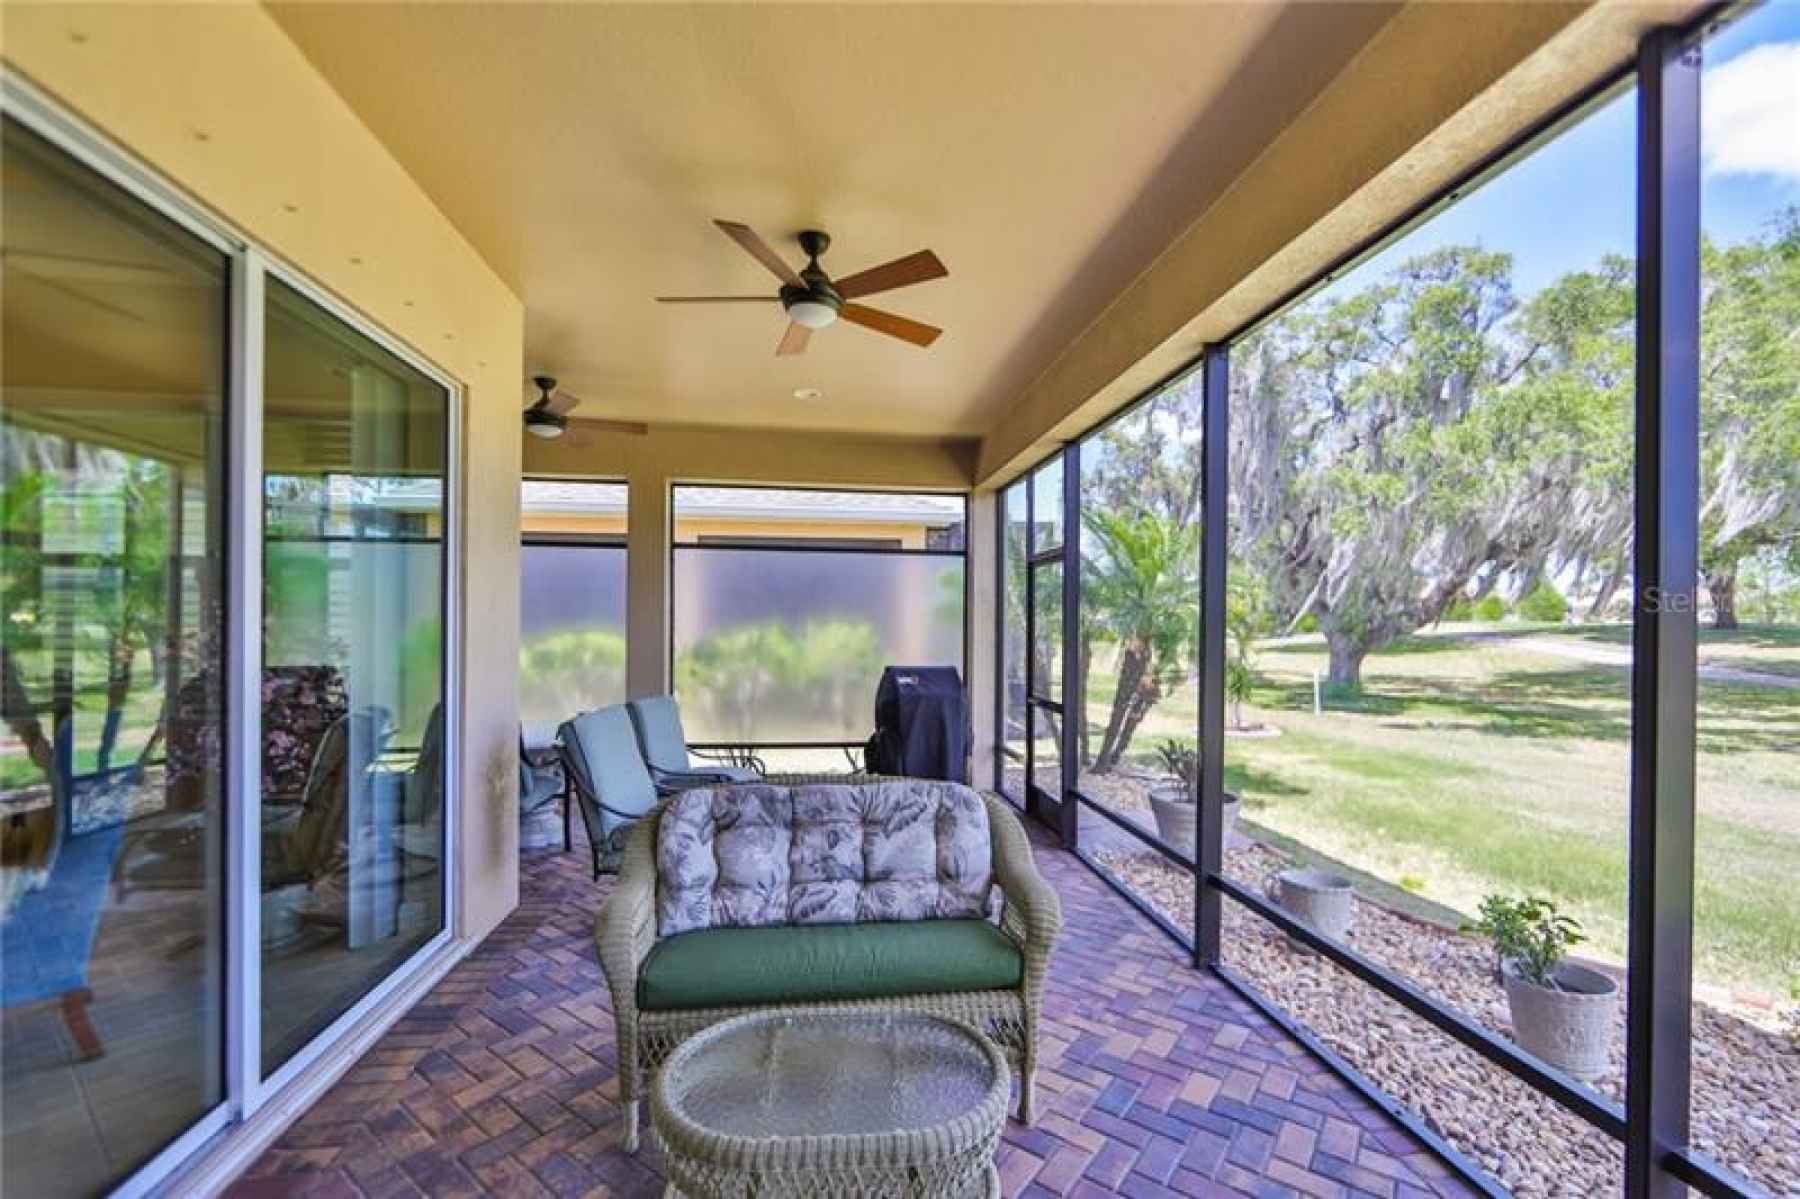 Large L-Shaped, screened lanai with permanent privacy screens and nothing but an expanse of green!